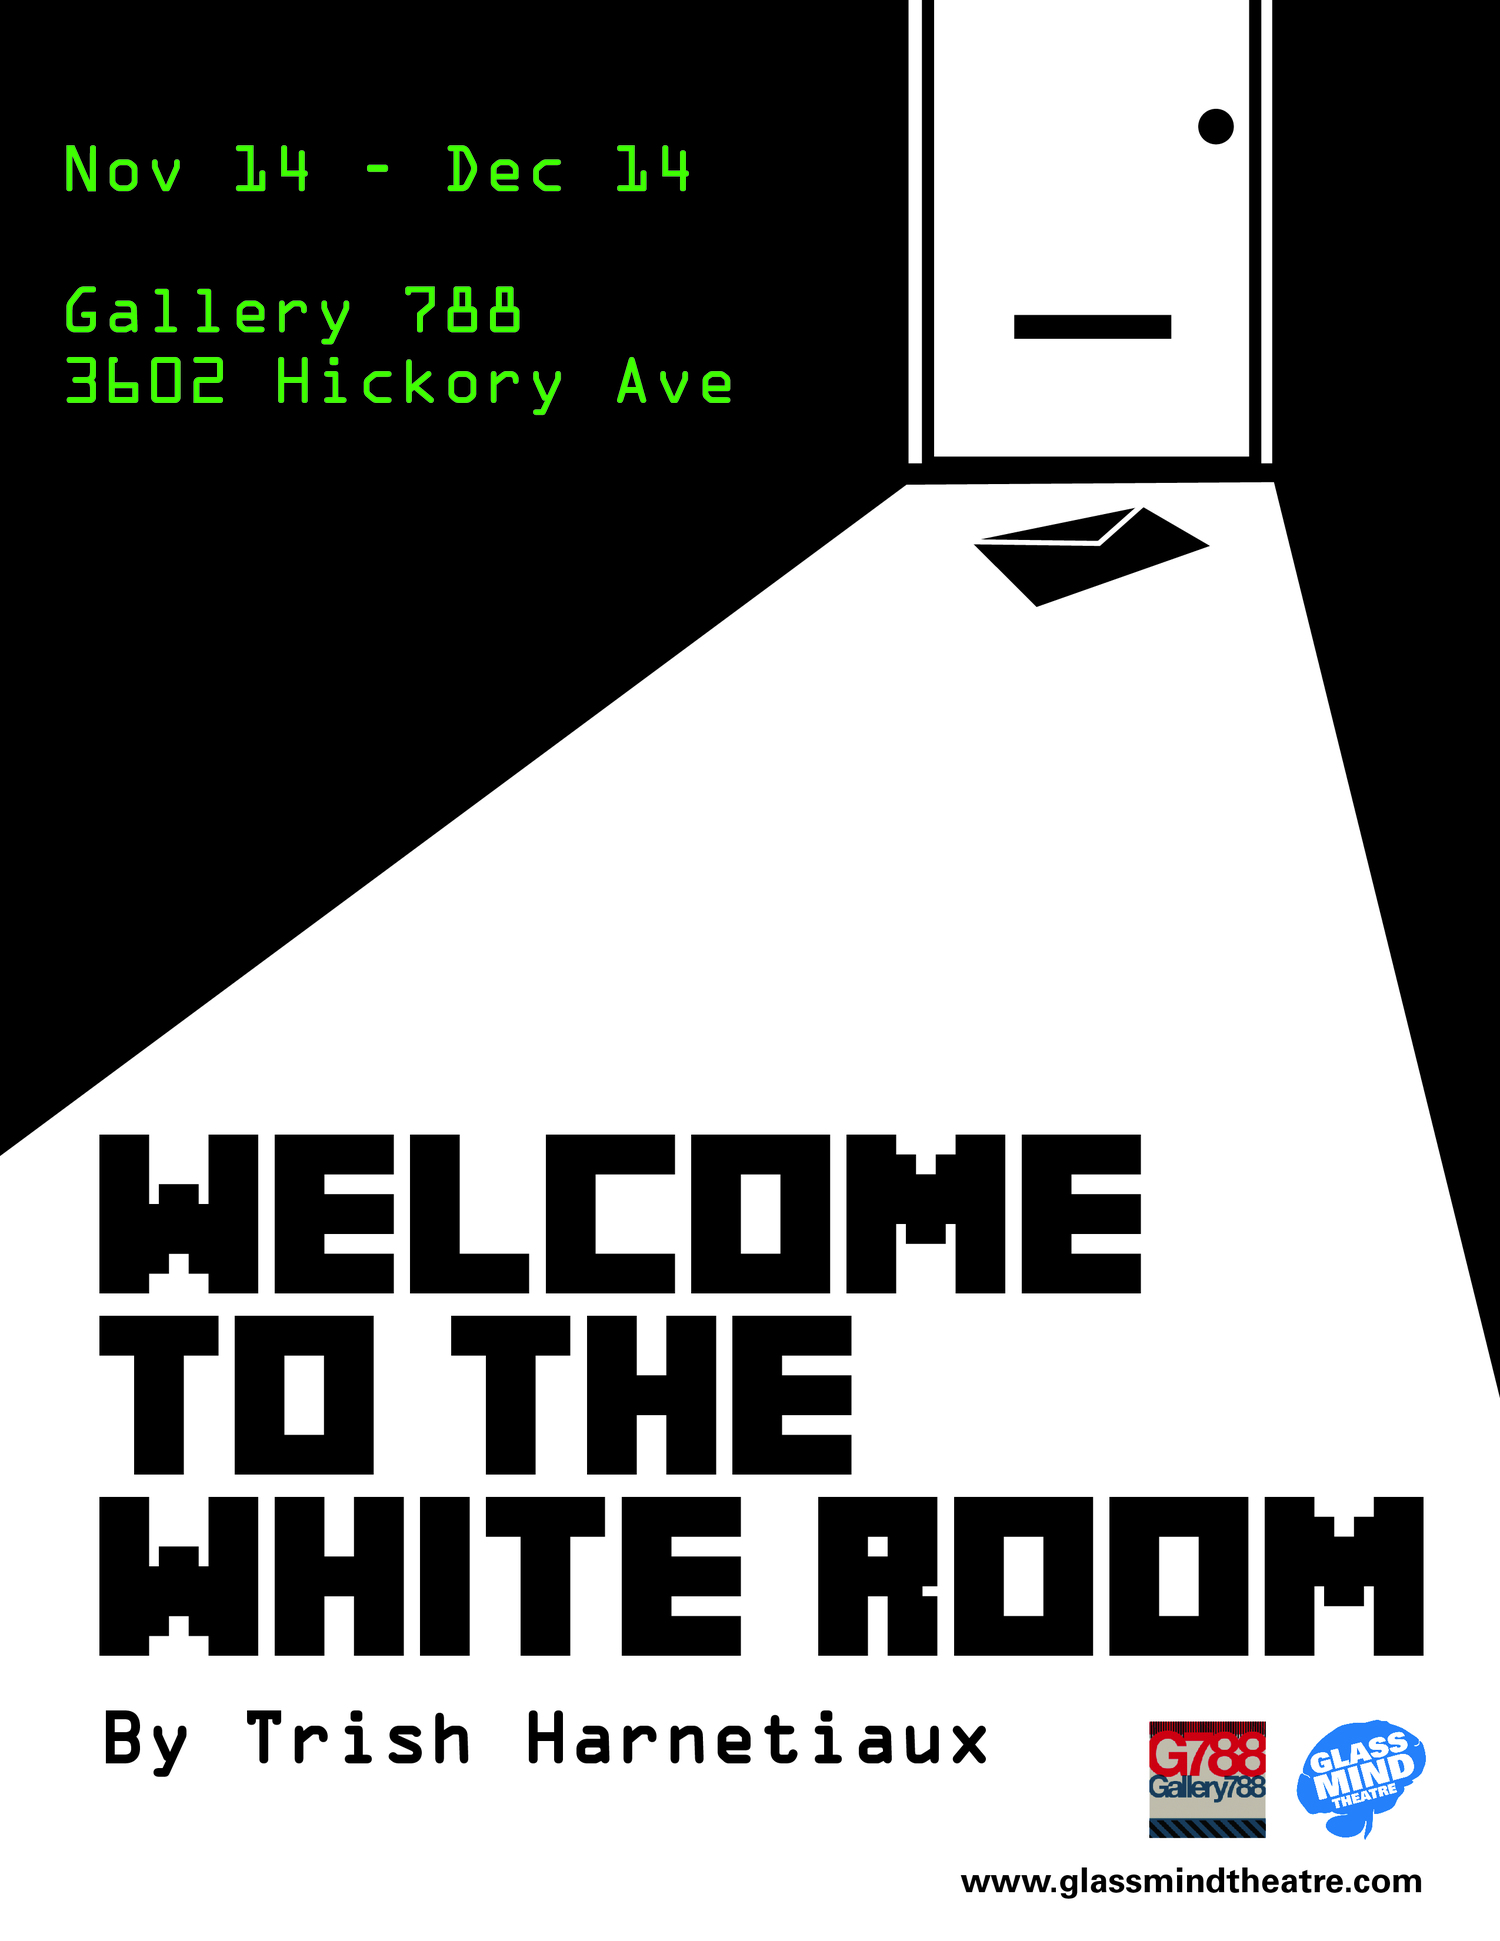 Welcome to the White room art
Design by Eleanor Harvey 2